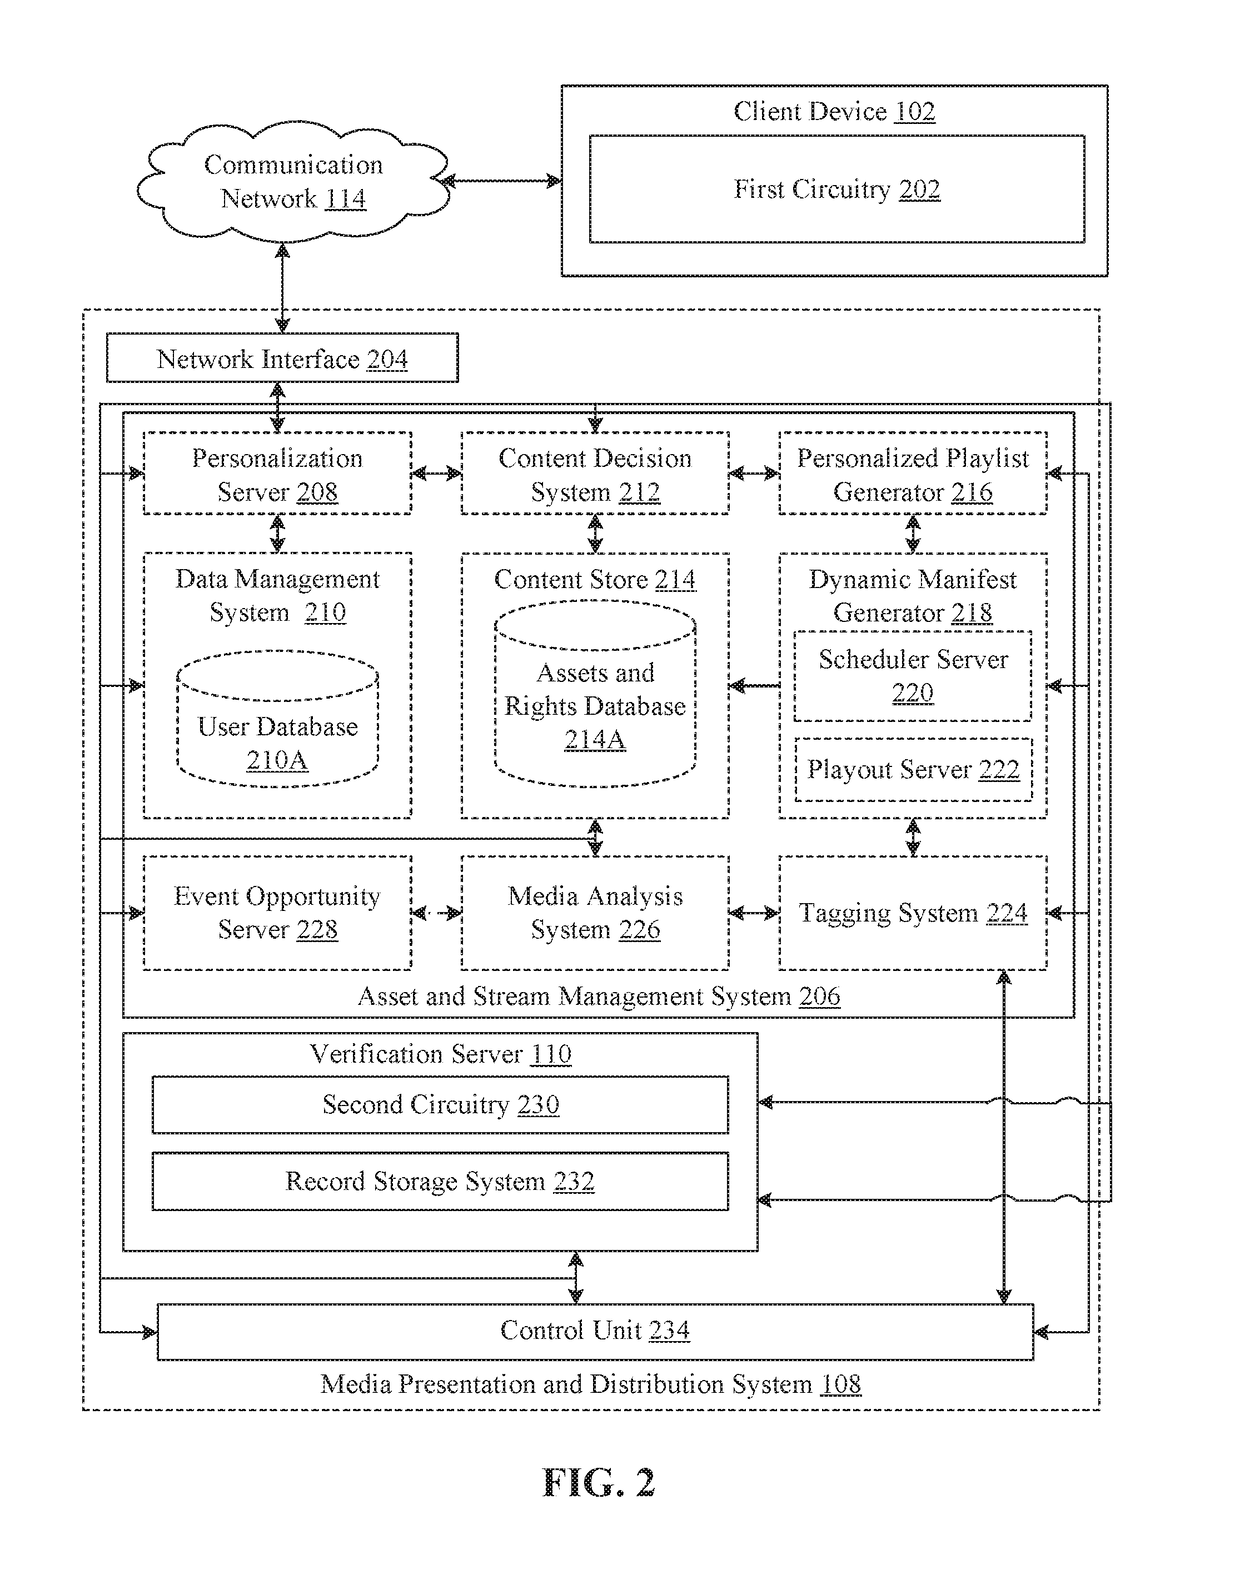 Dynamic verification of playback of media assets at client device